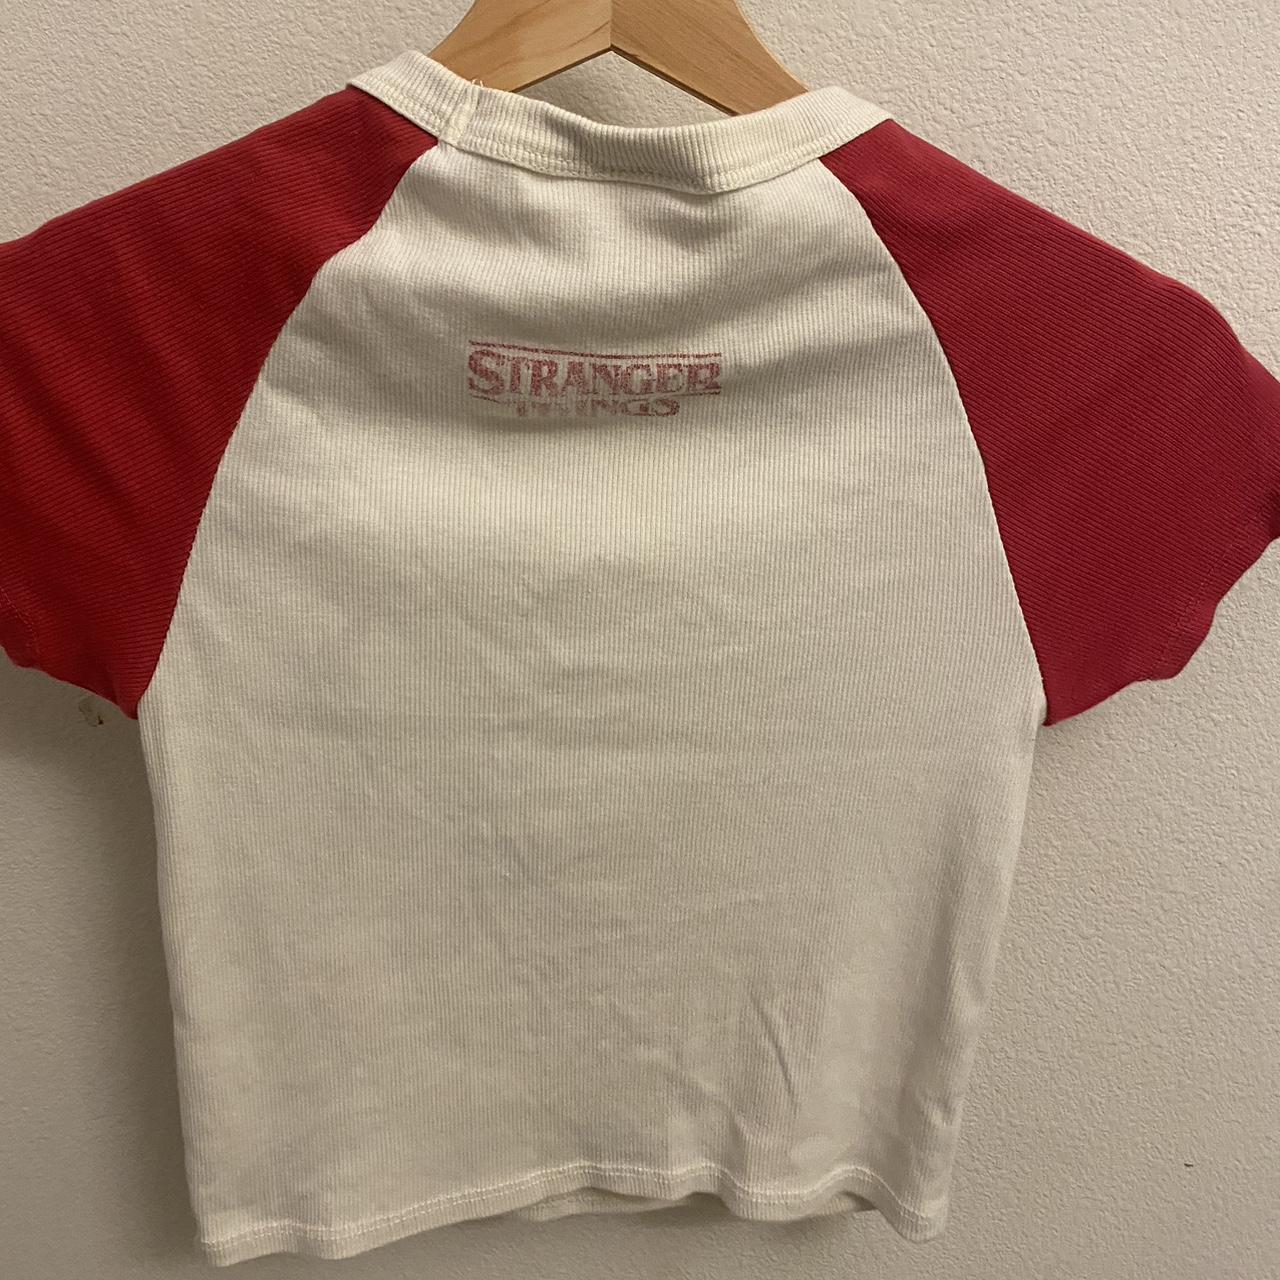 pacsun strangers things “surfer boy pizza”baby... - Depop